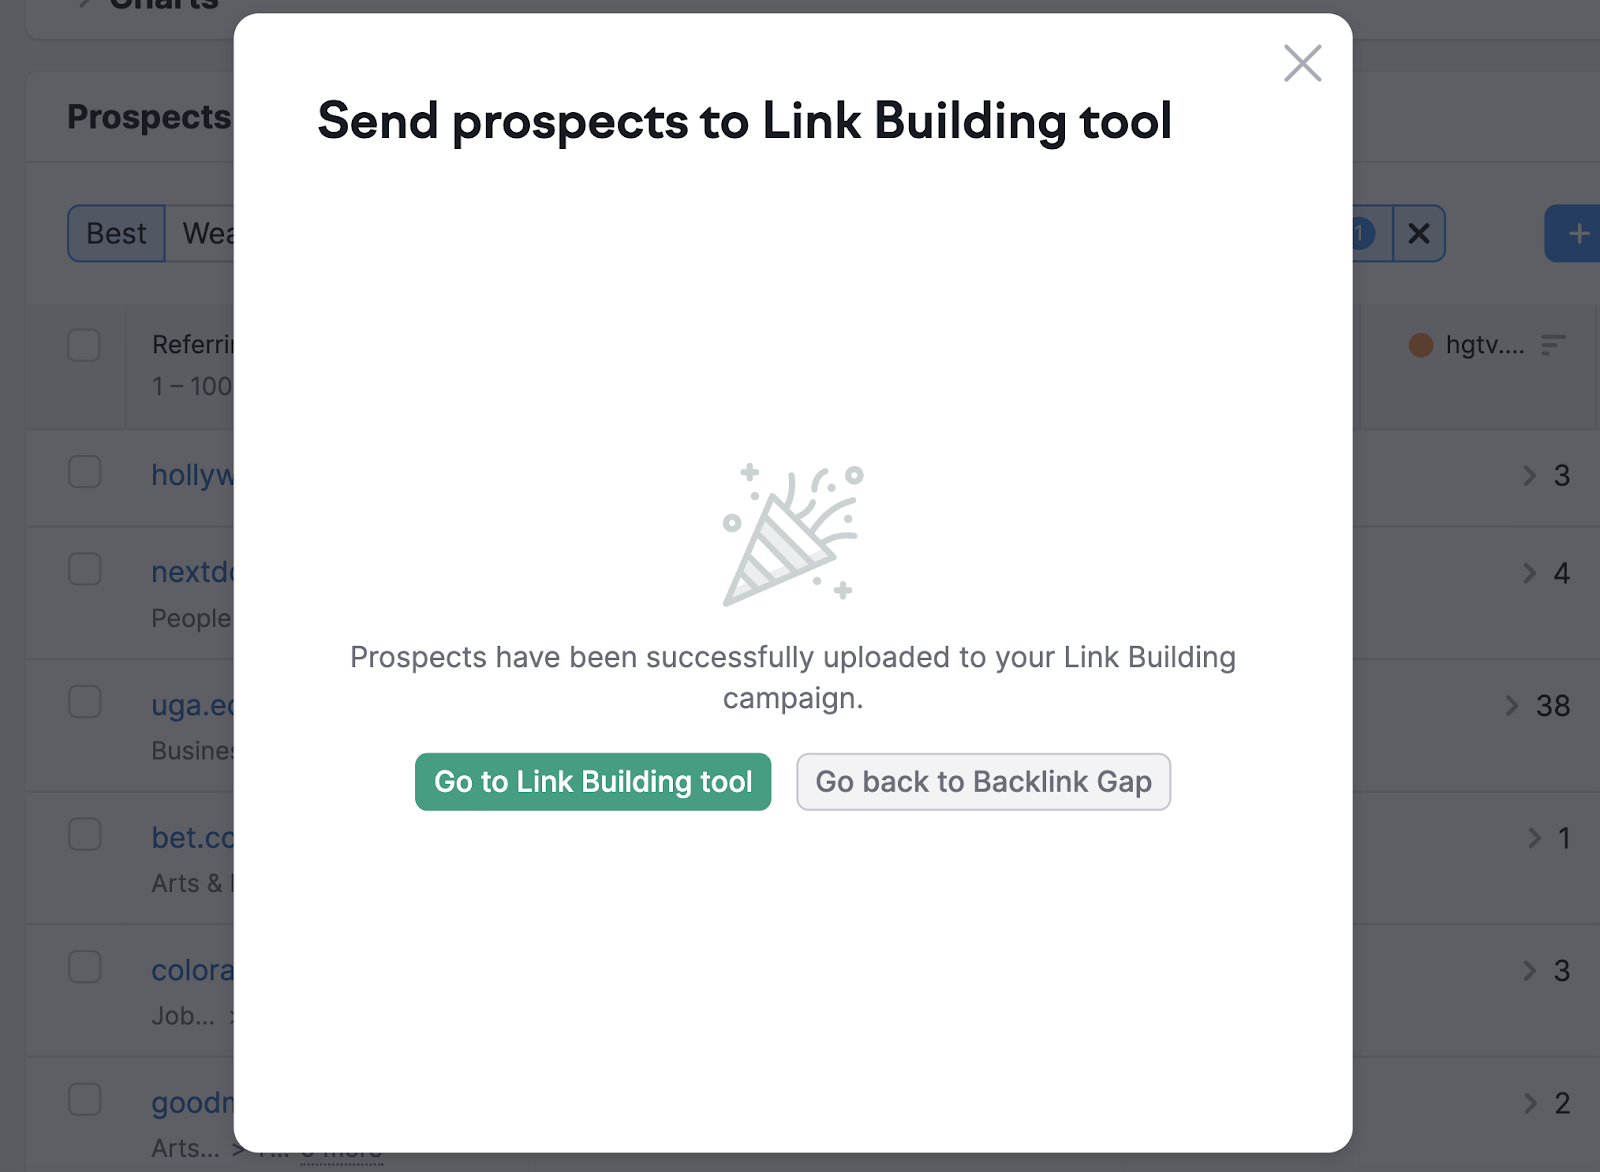 "Go to Link Building Tool," and "Go back to Backlink Gap" options show up after you sent prospects to the Link Building Tool